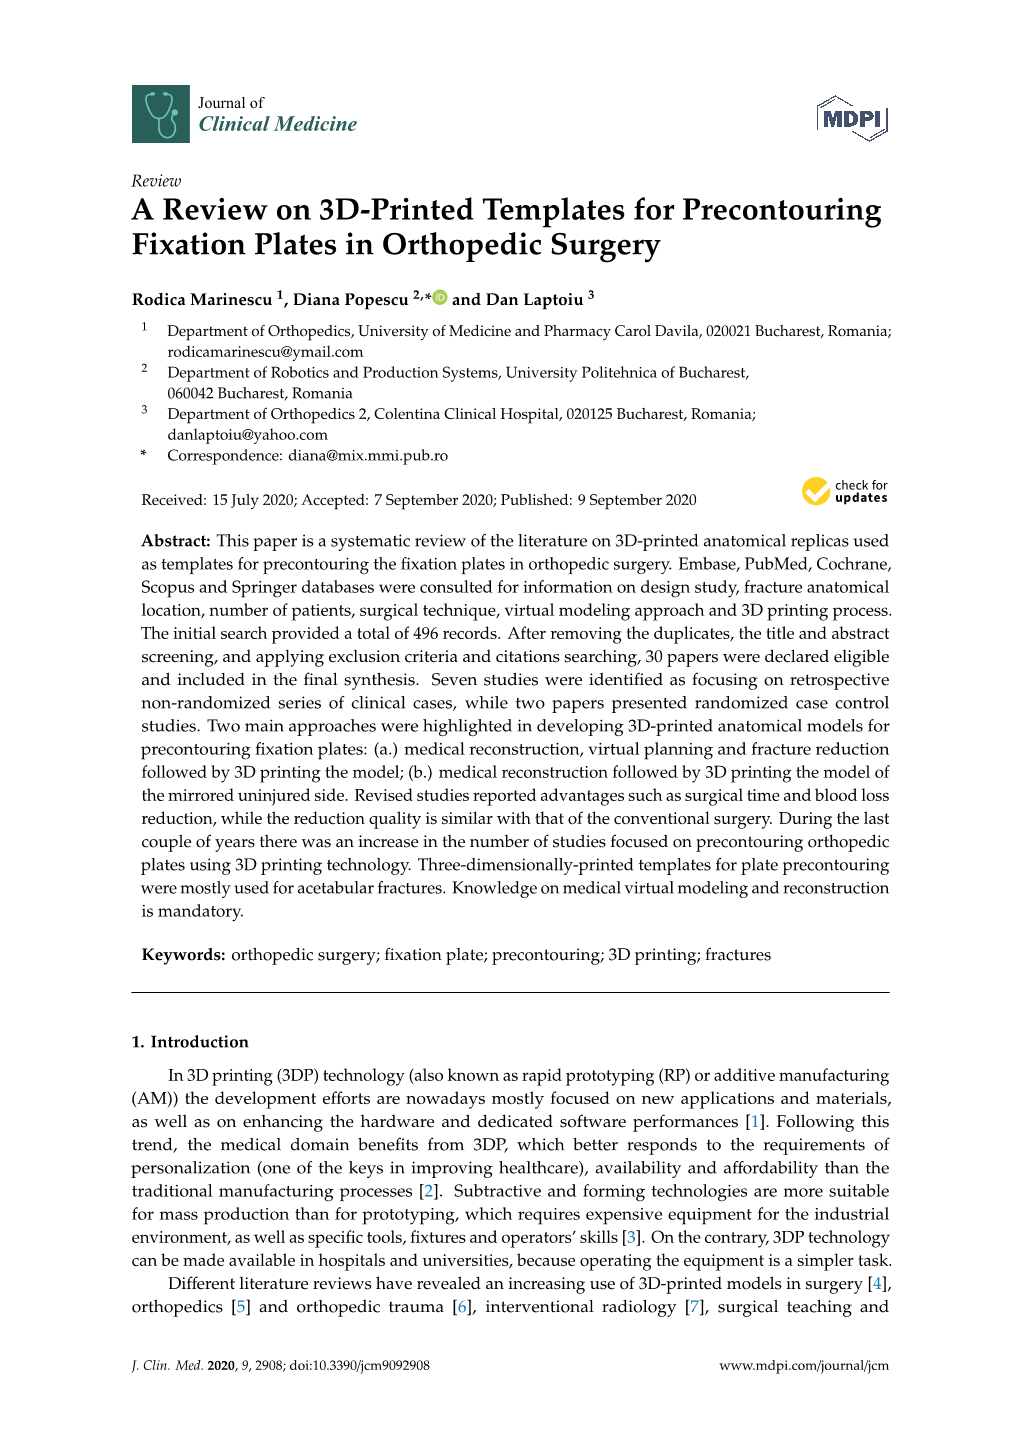 A Review on 3D-Printed Templates for Precontouring Fixation Plates in Orthopedic Surgery